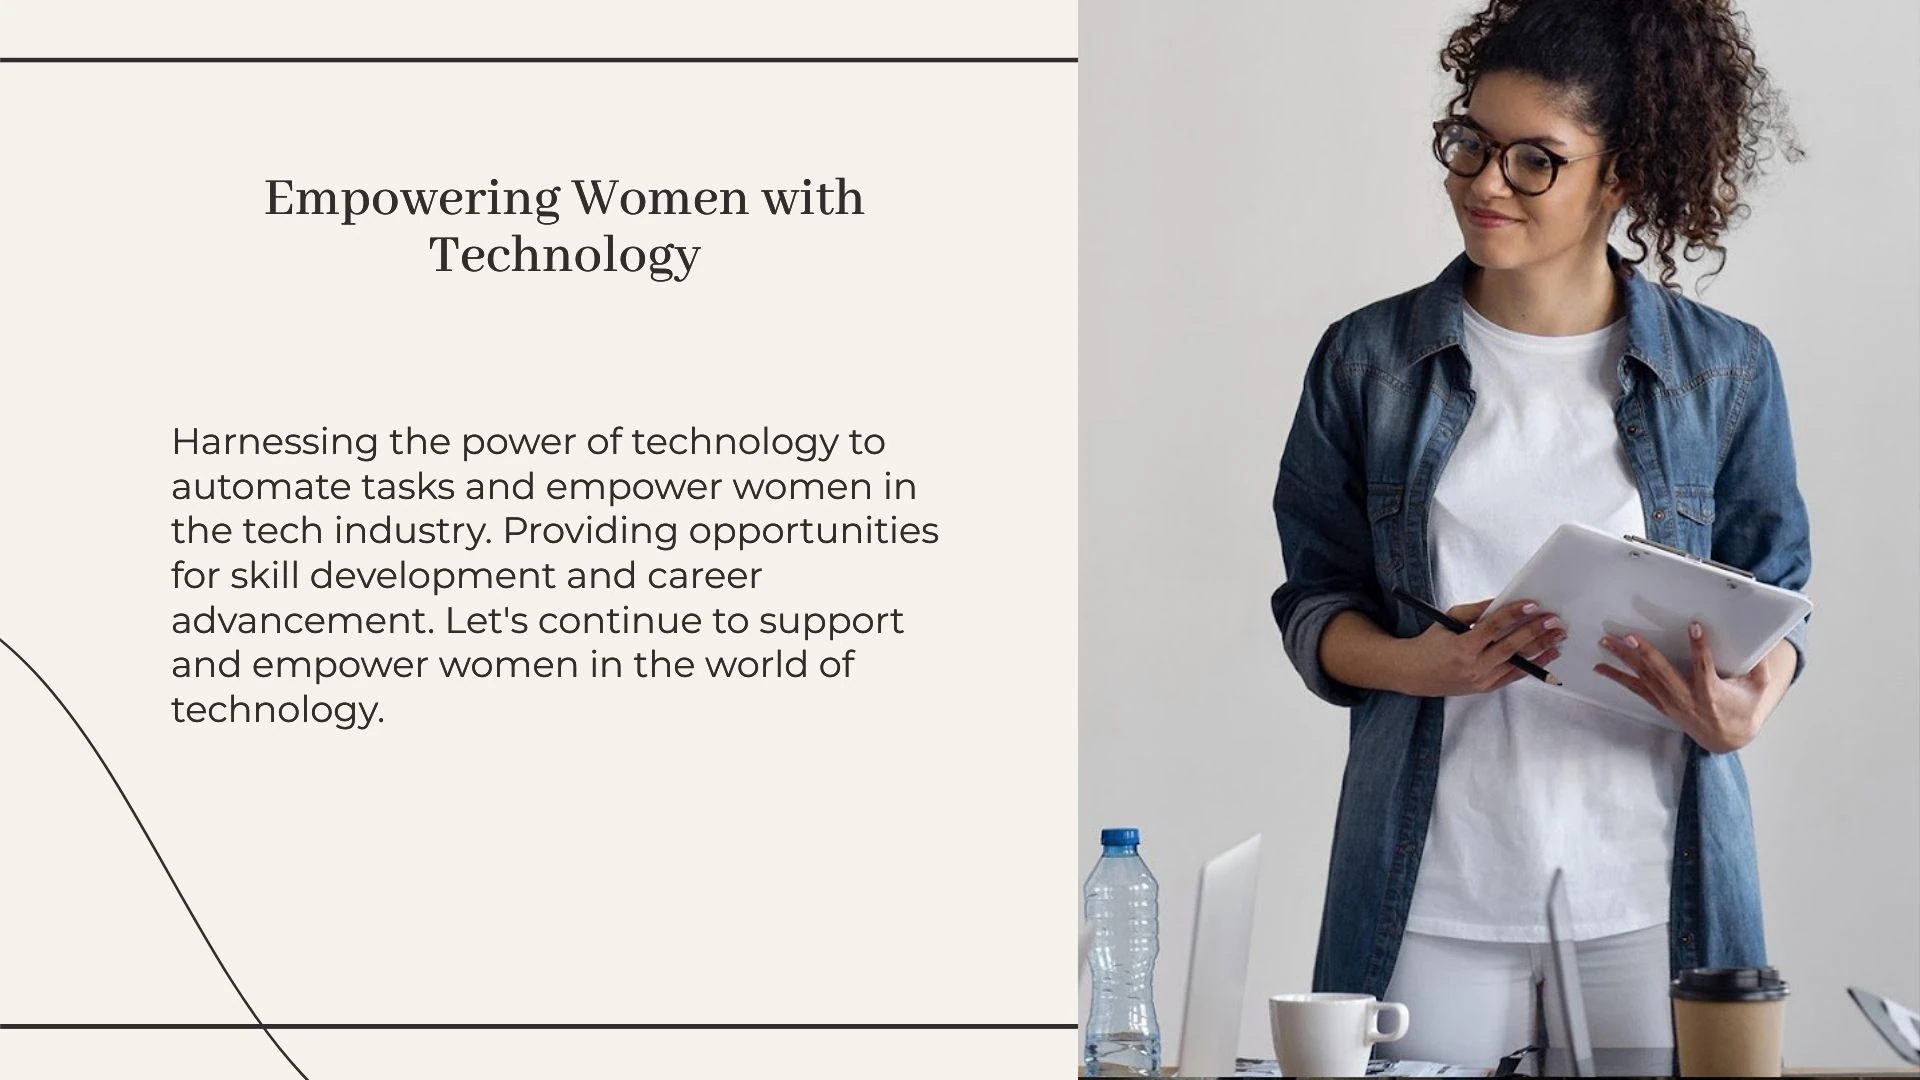 Empowering Women with Technology: Bridging the Gender Gap in Tech